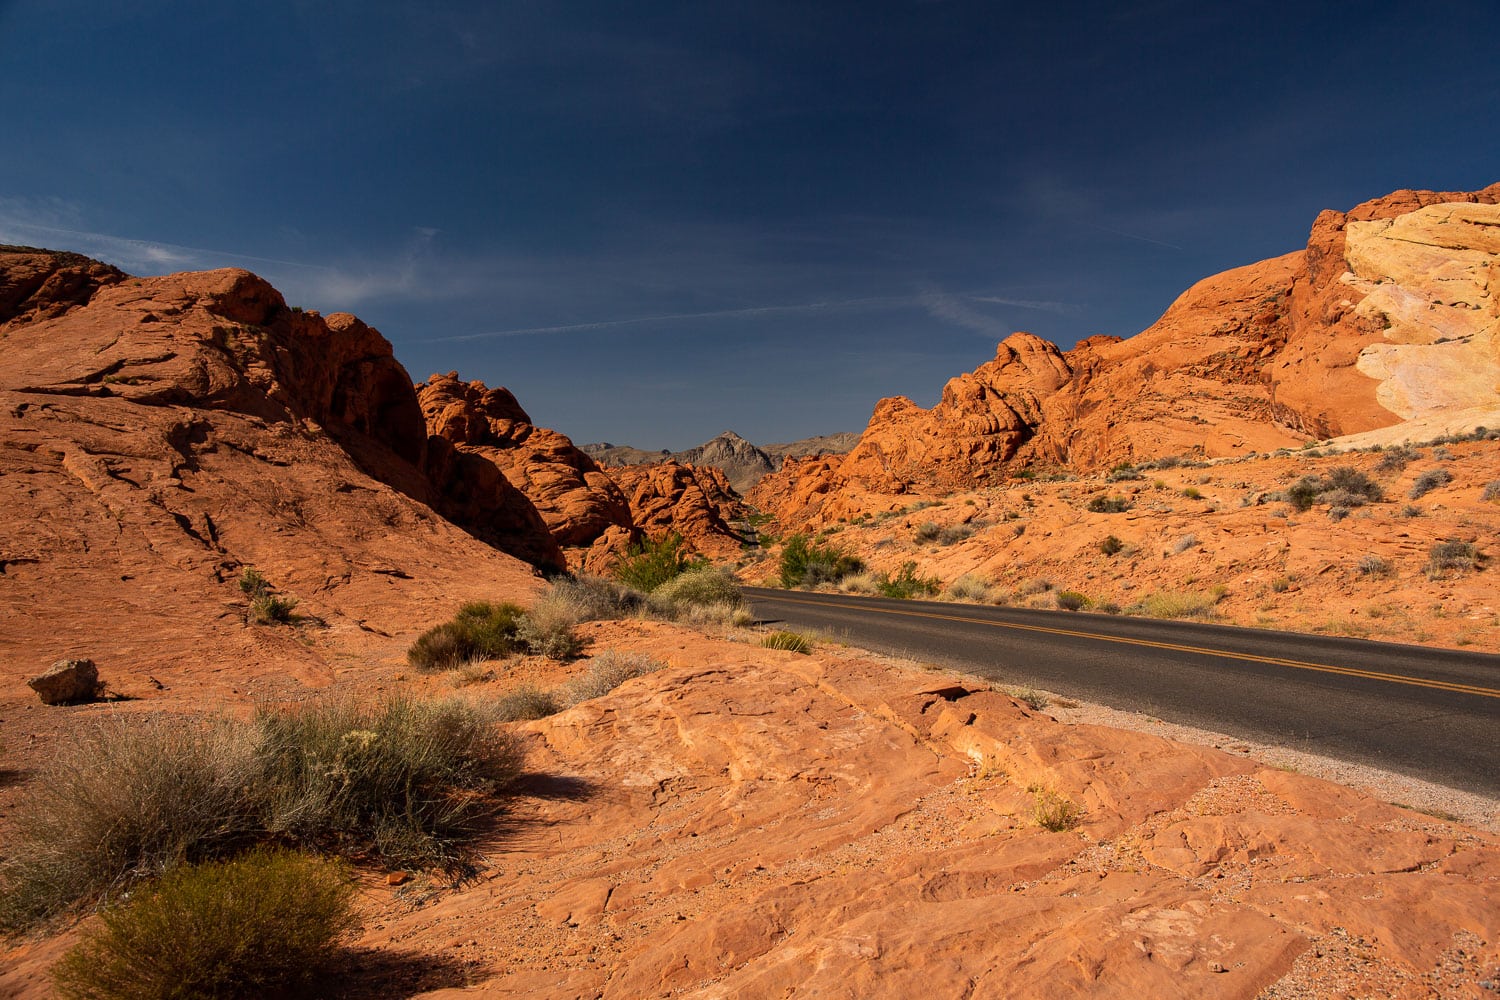 The road leading to Rainbow Vista in Valley of Fire, Nevada.